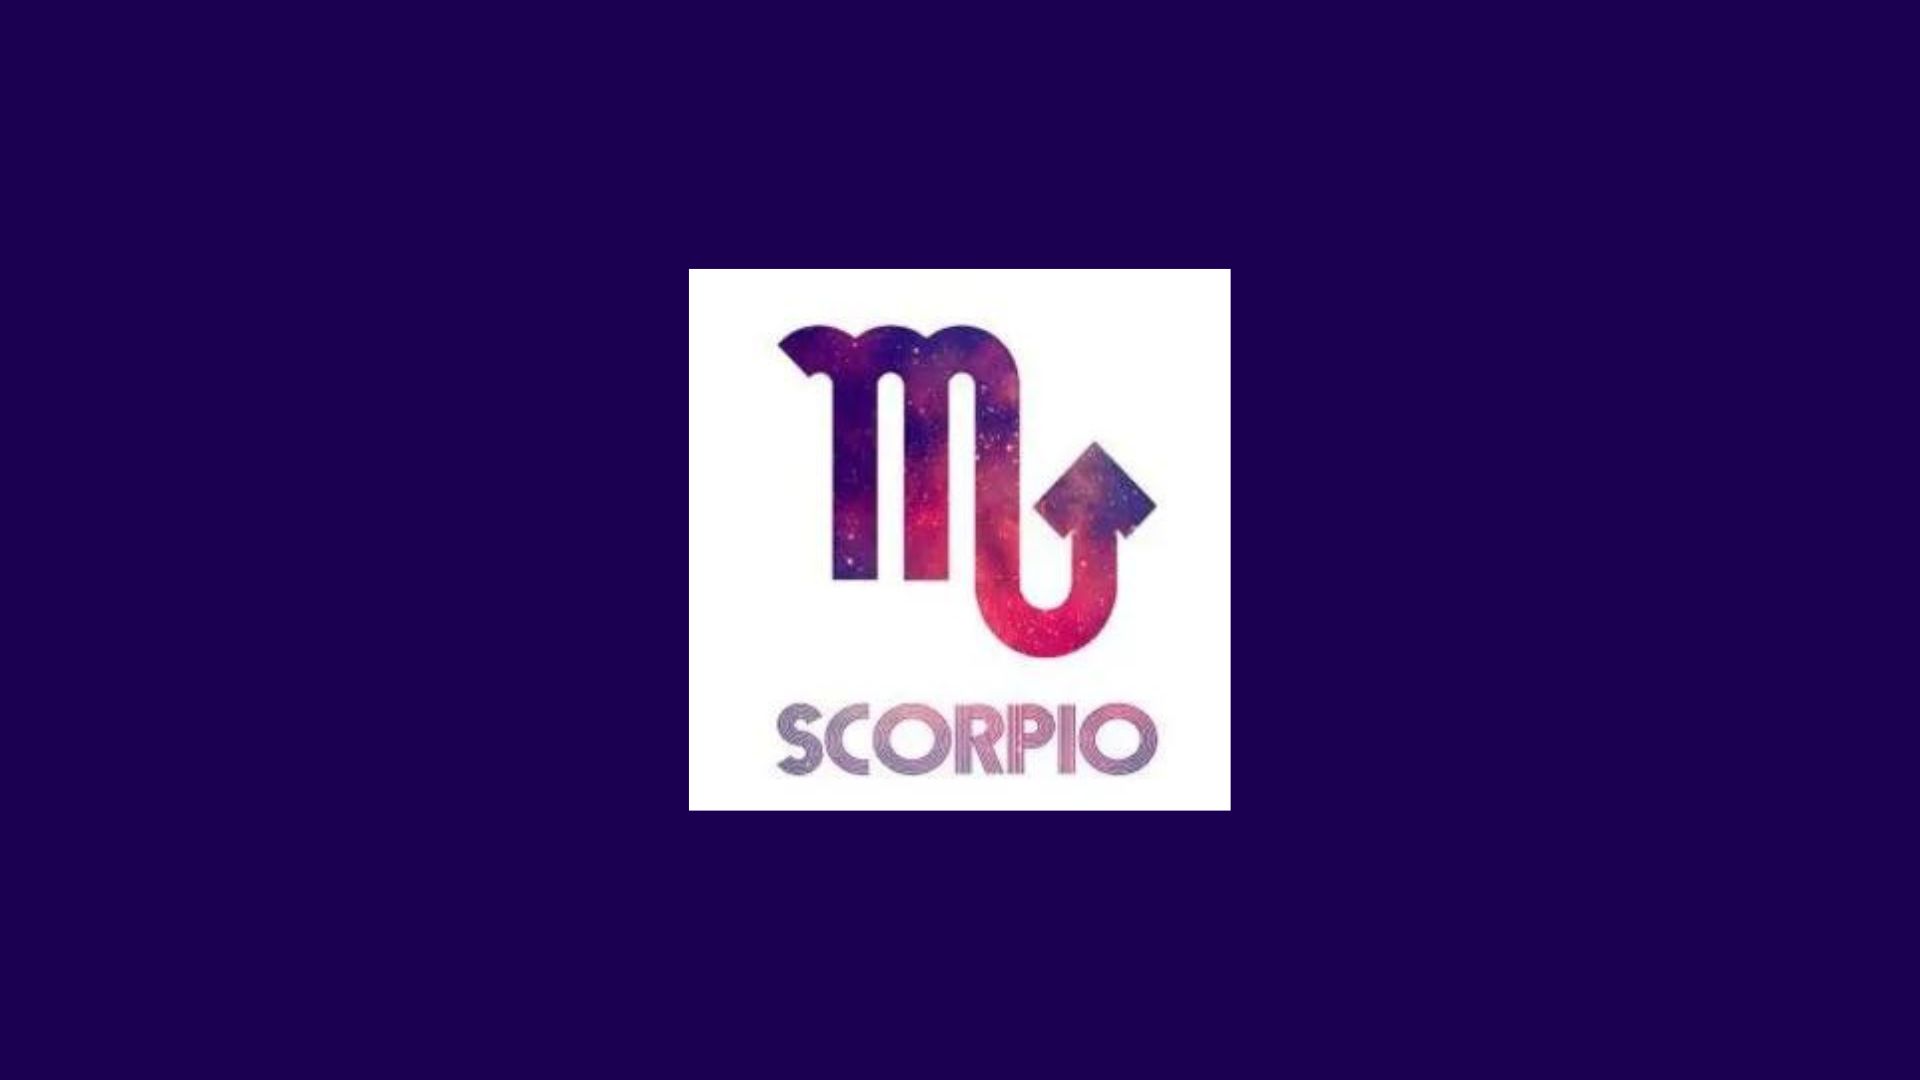 Scorpio Sign With Purple And White Background